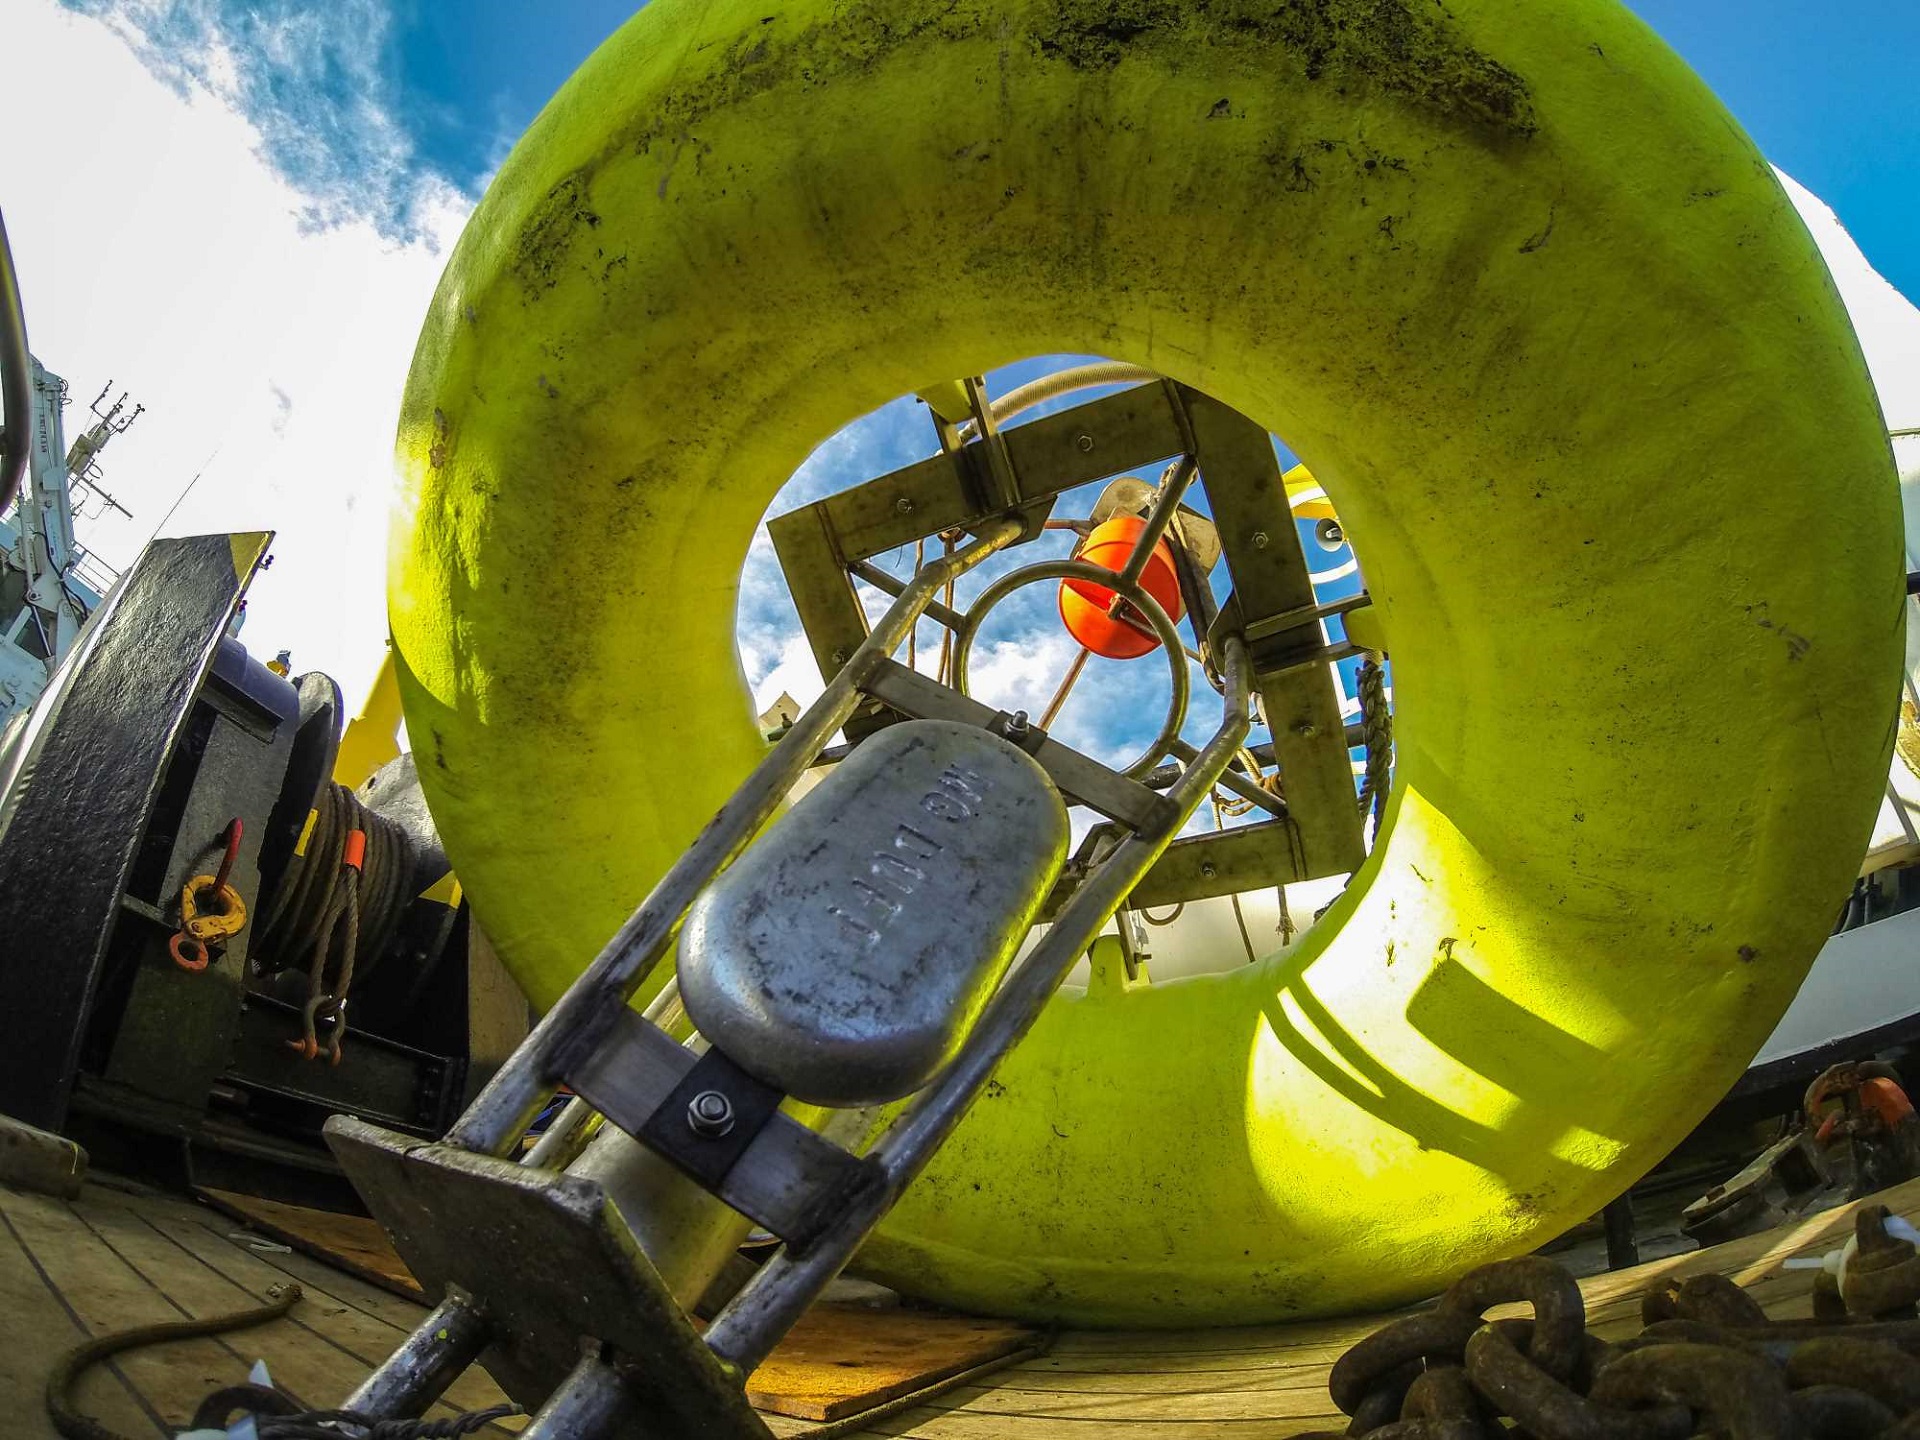 a smartbuoy - floatable scientific device - on the deck of a ship